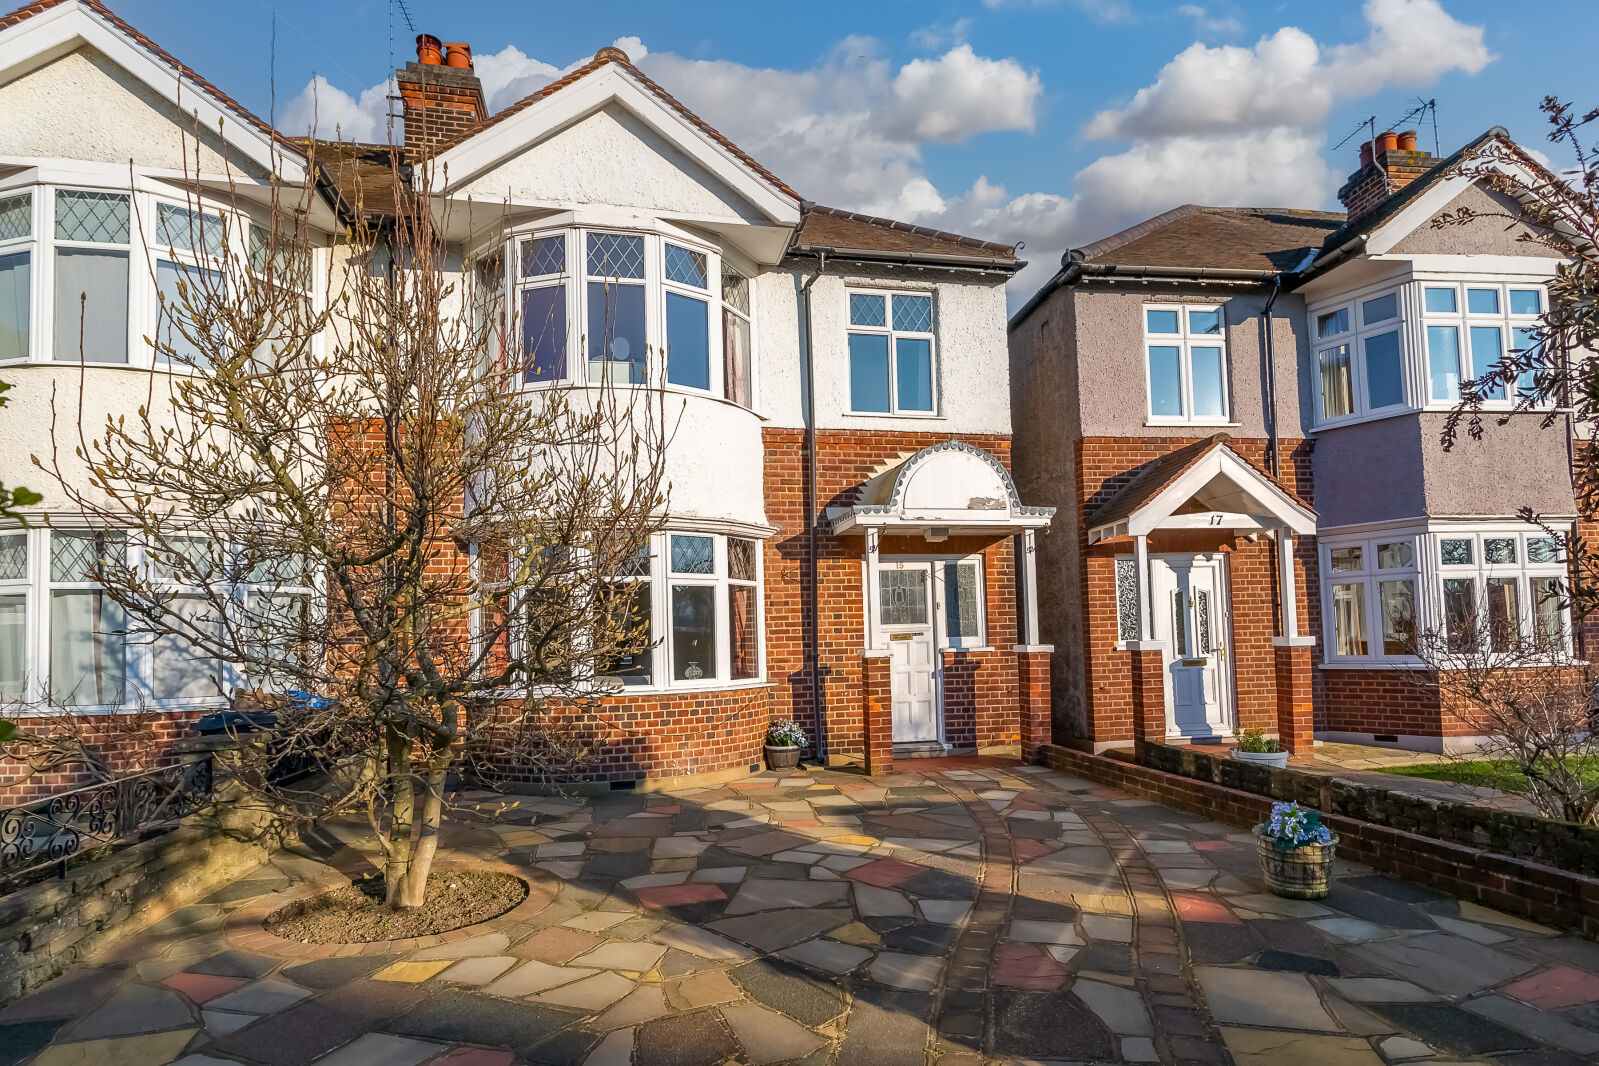 3 bedroom semi detached house for sale Circle Gardens, London, SW19, main image